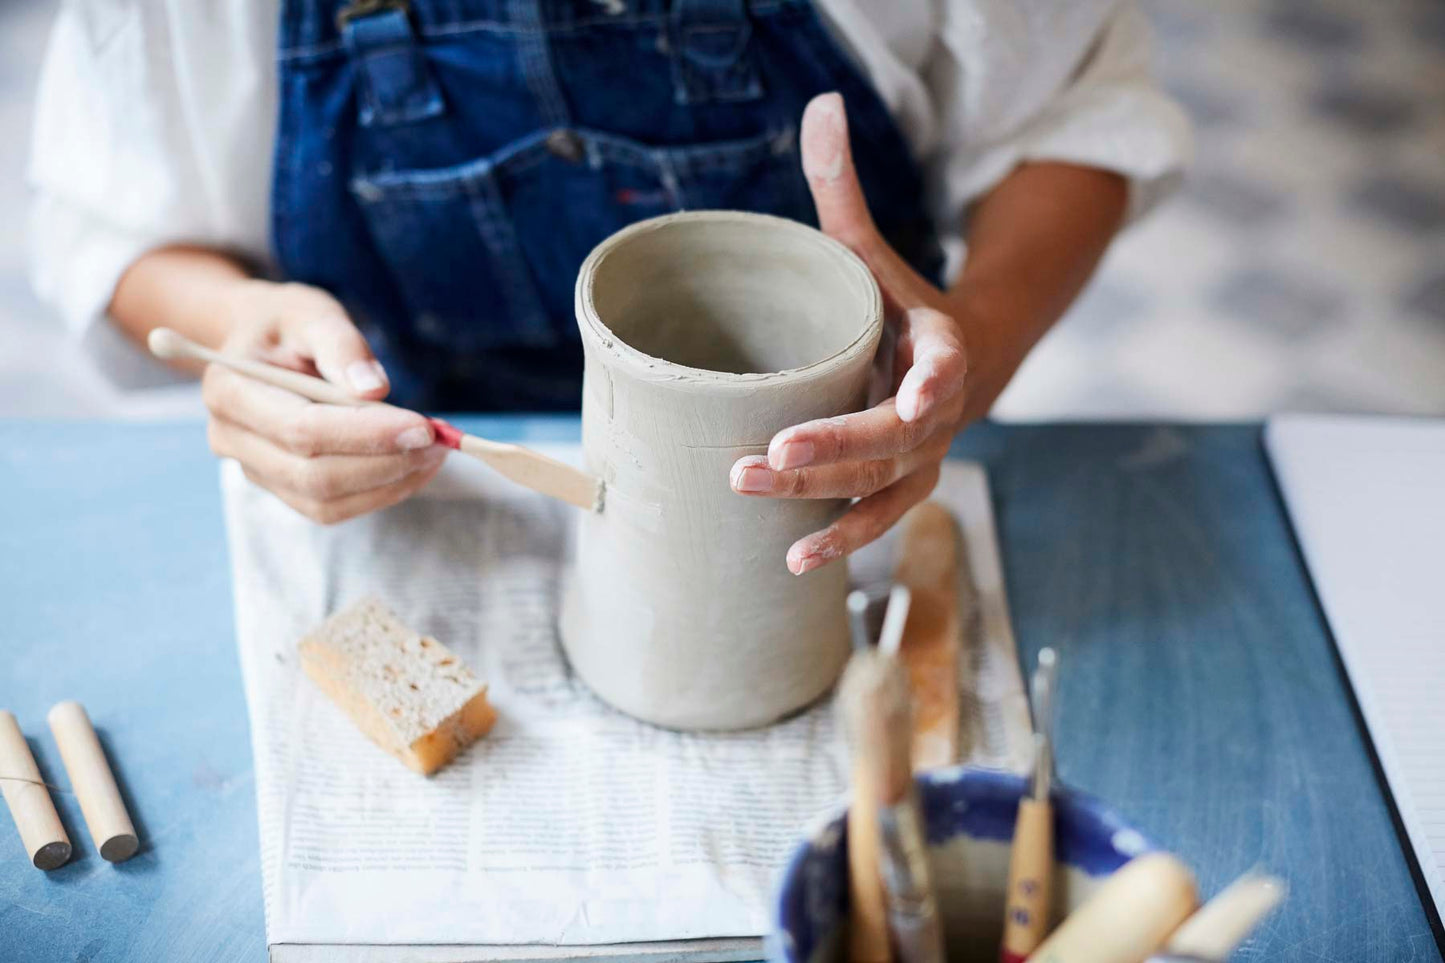 "Wheel Throwing or Hand Building" Ceramic Workshop with Tiziana in Berlin, Germany